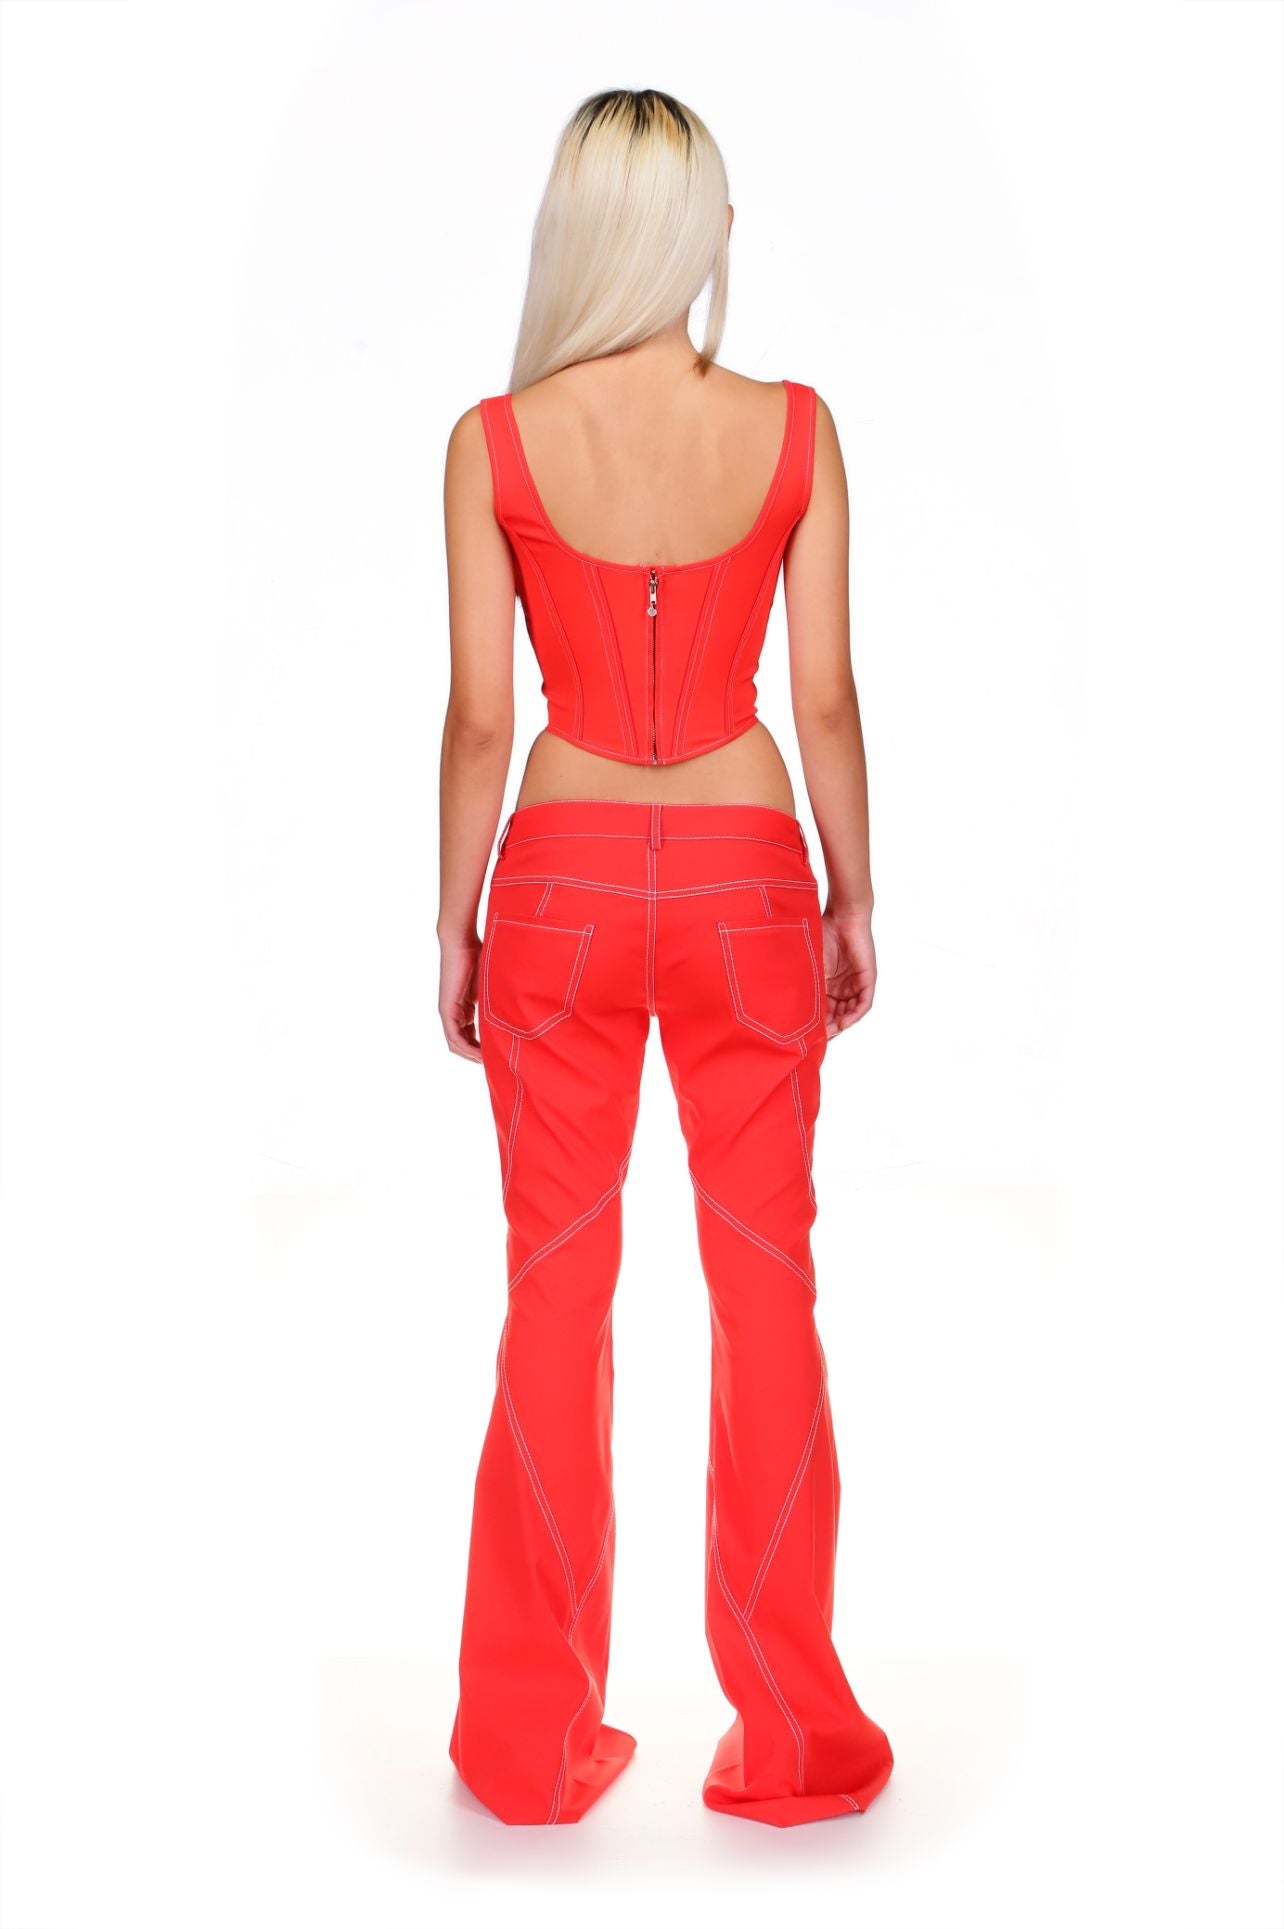 Chili Red Lace Up Flared Pants